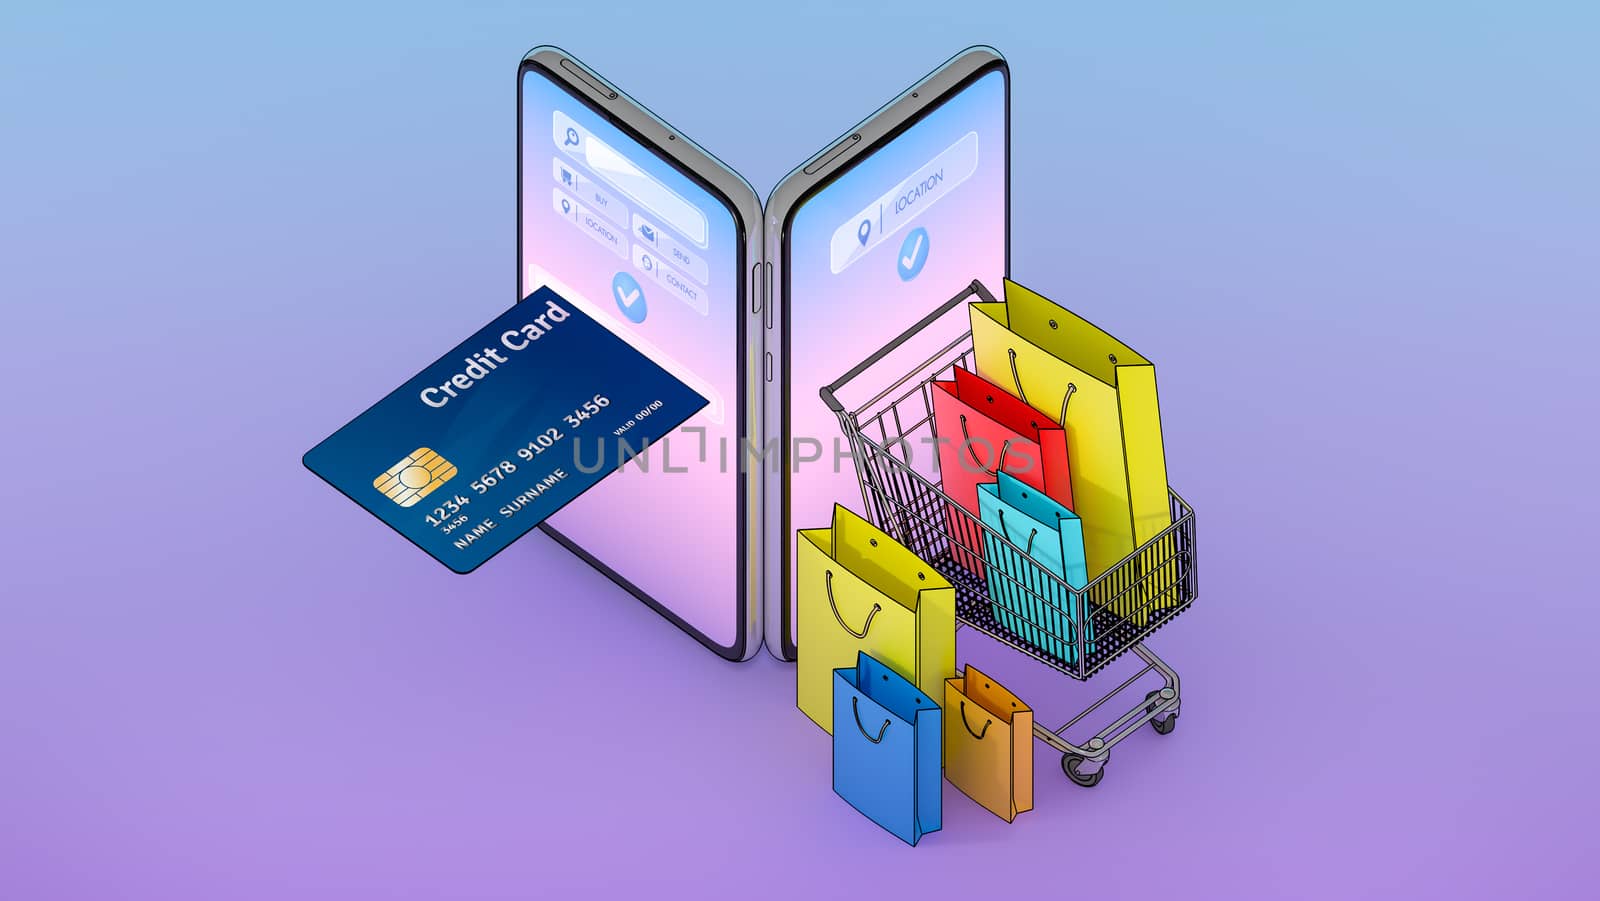 Many Shopping bag and price tag and credit card in a shopping cart appeared from smartphones screen., shopping online or shopaholic concept.,3d illustration with object clipping path. by anotestocker